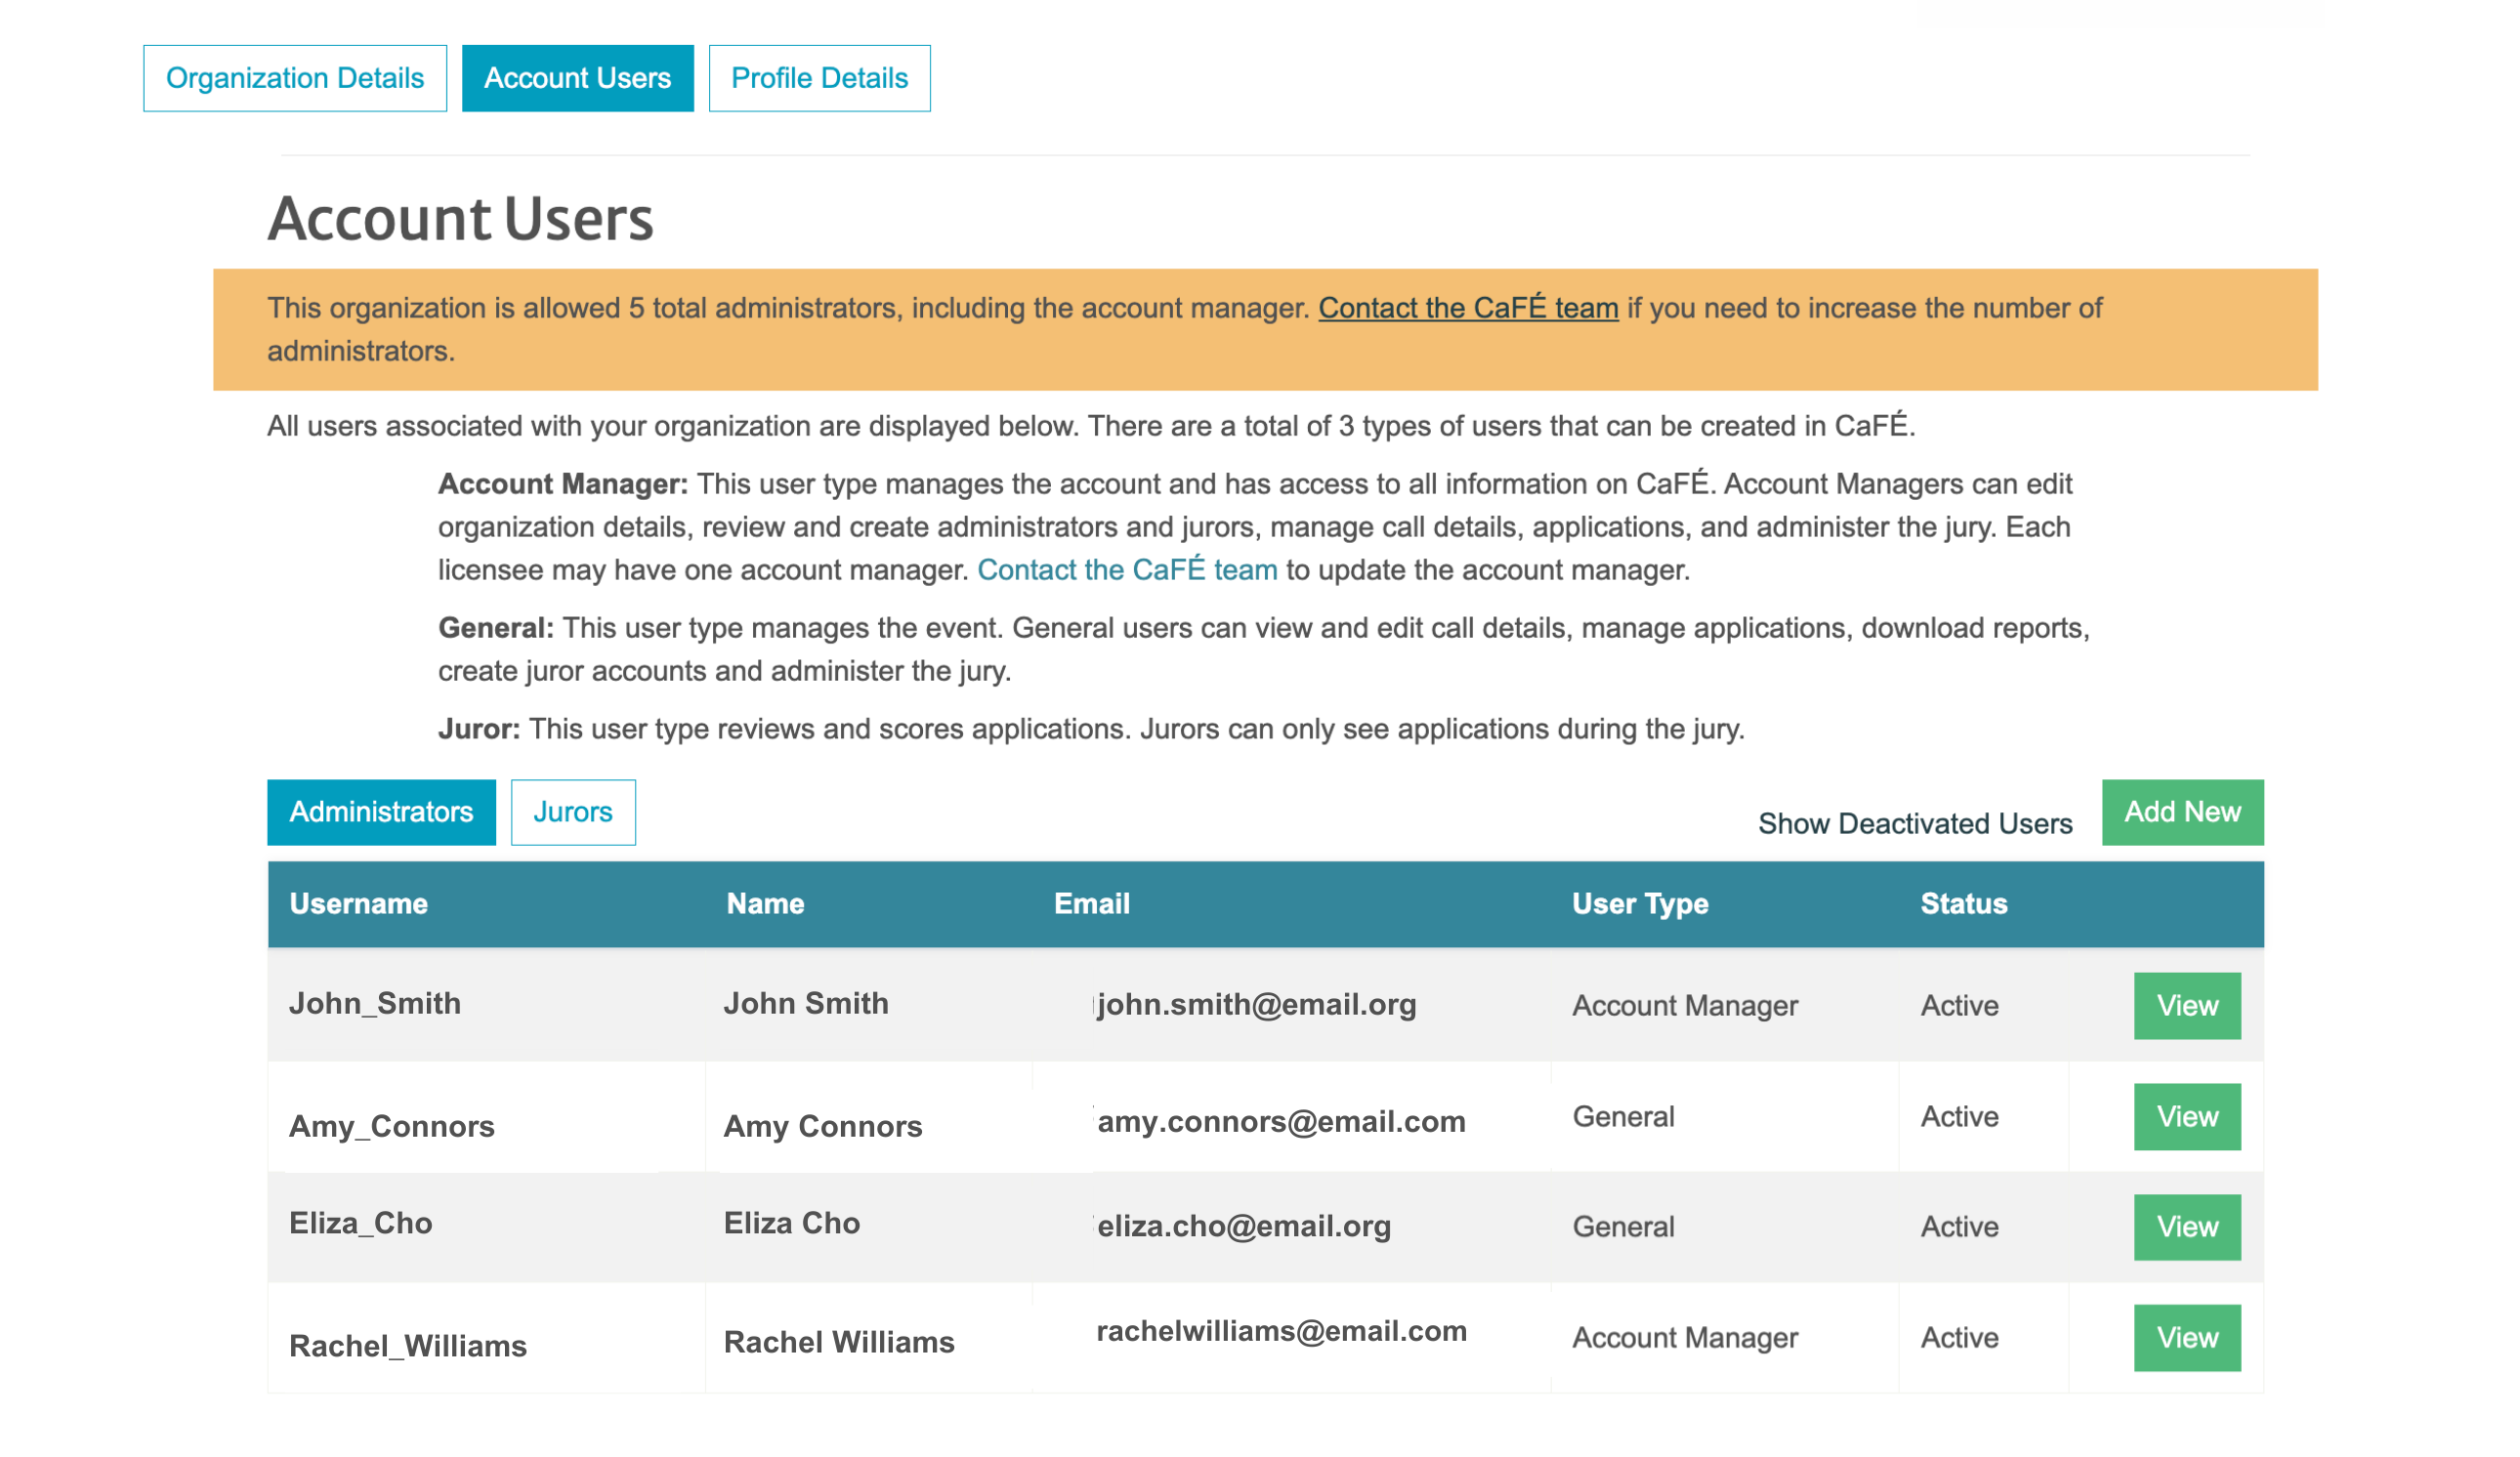 screenshot of the Account Users page showing the list of active and deactivated users